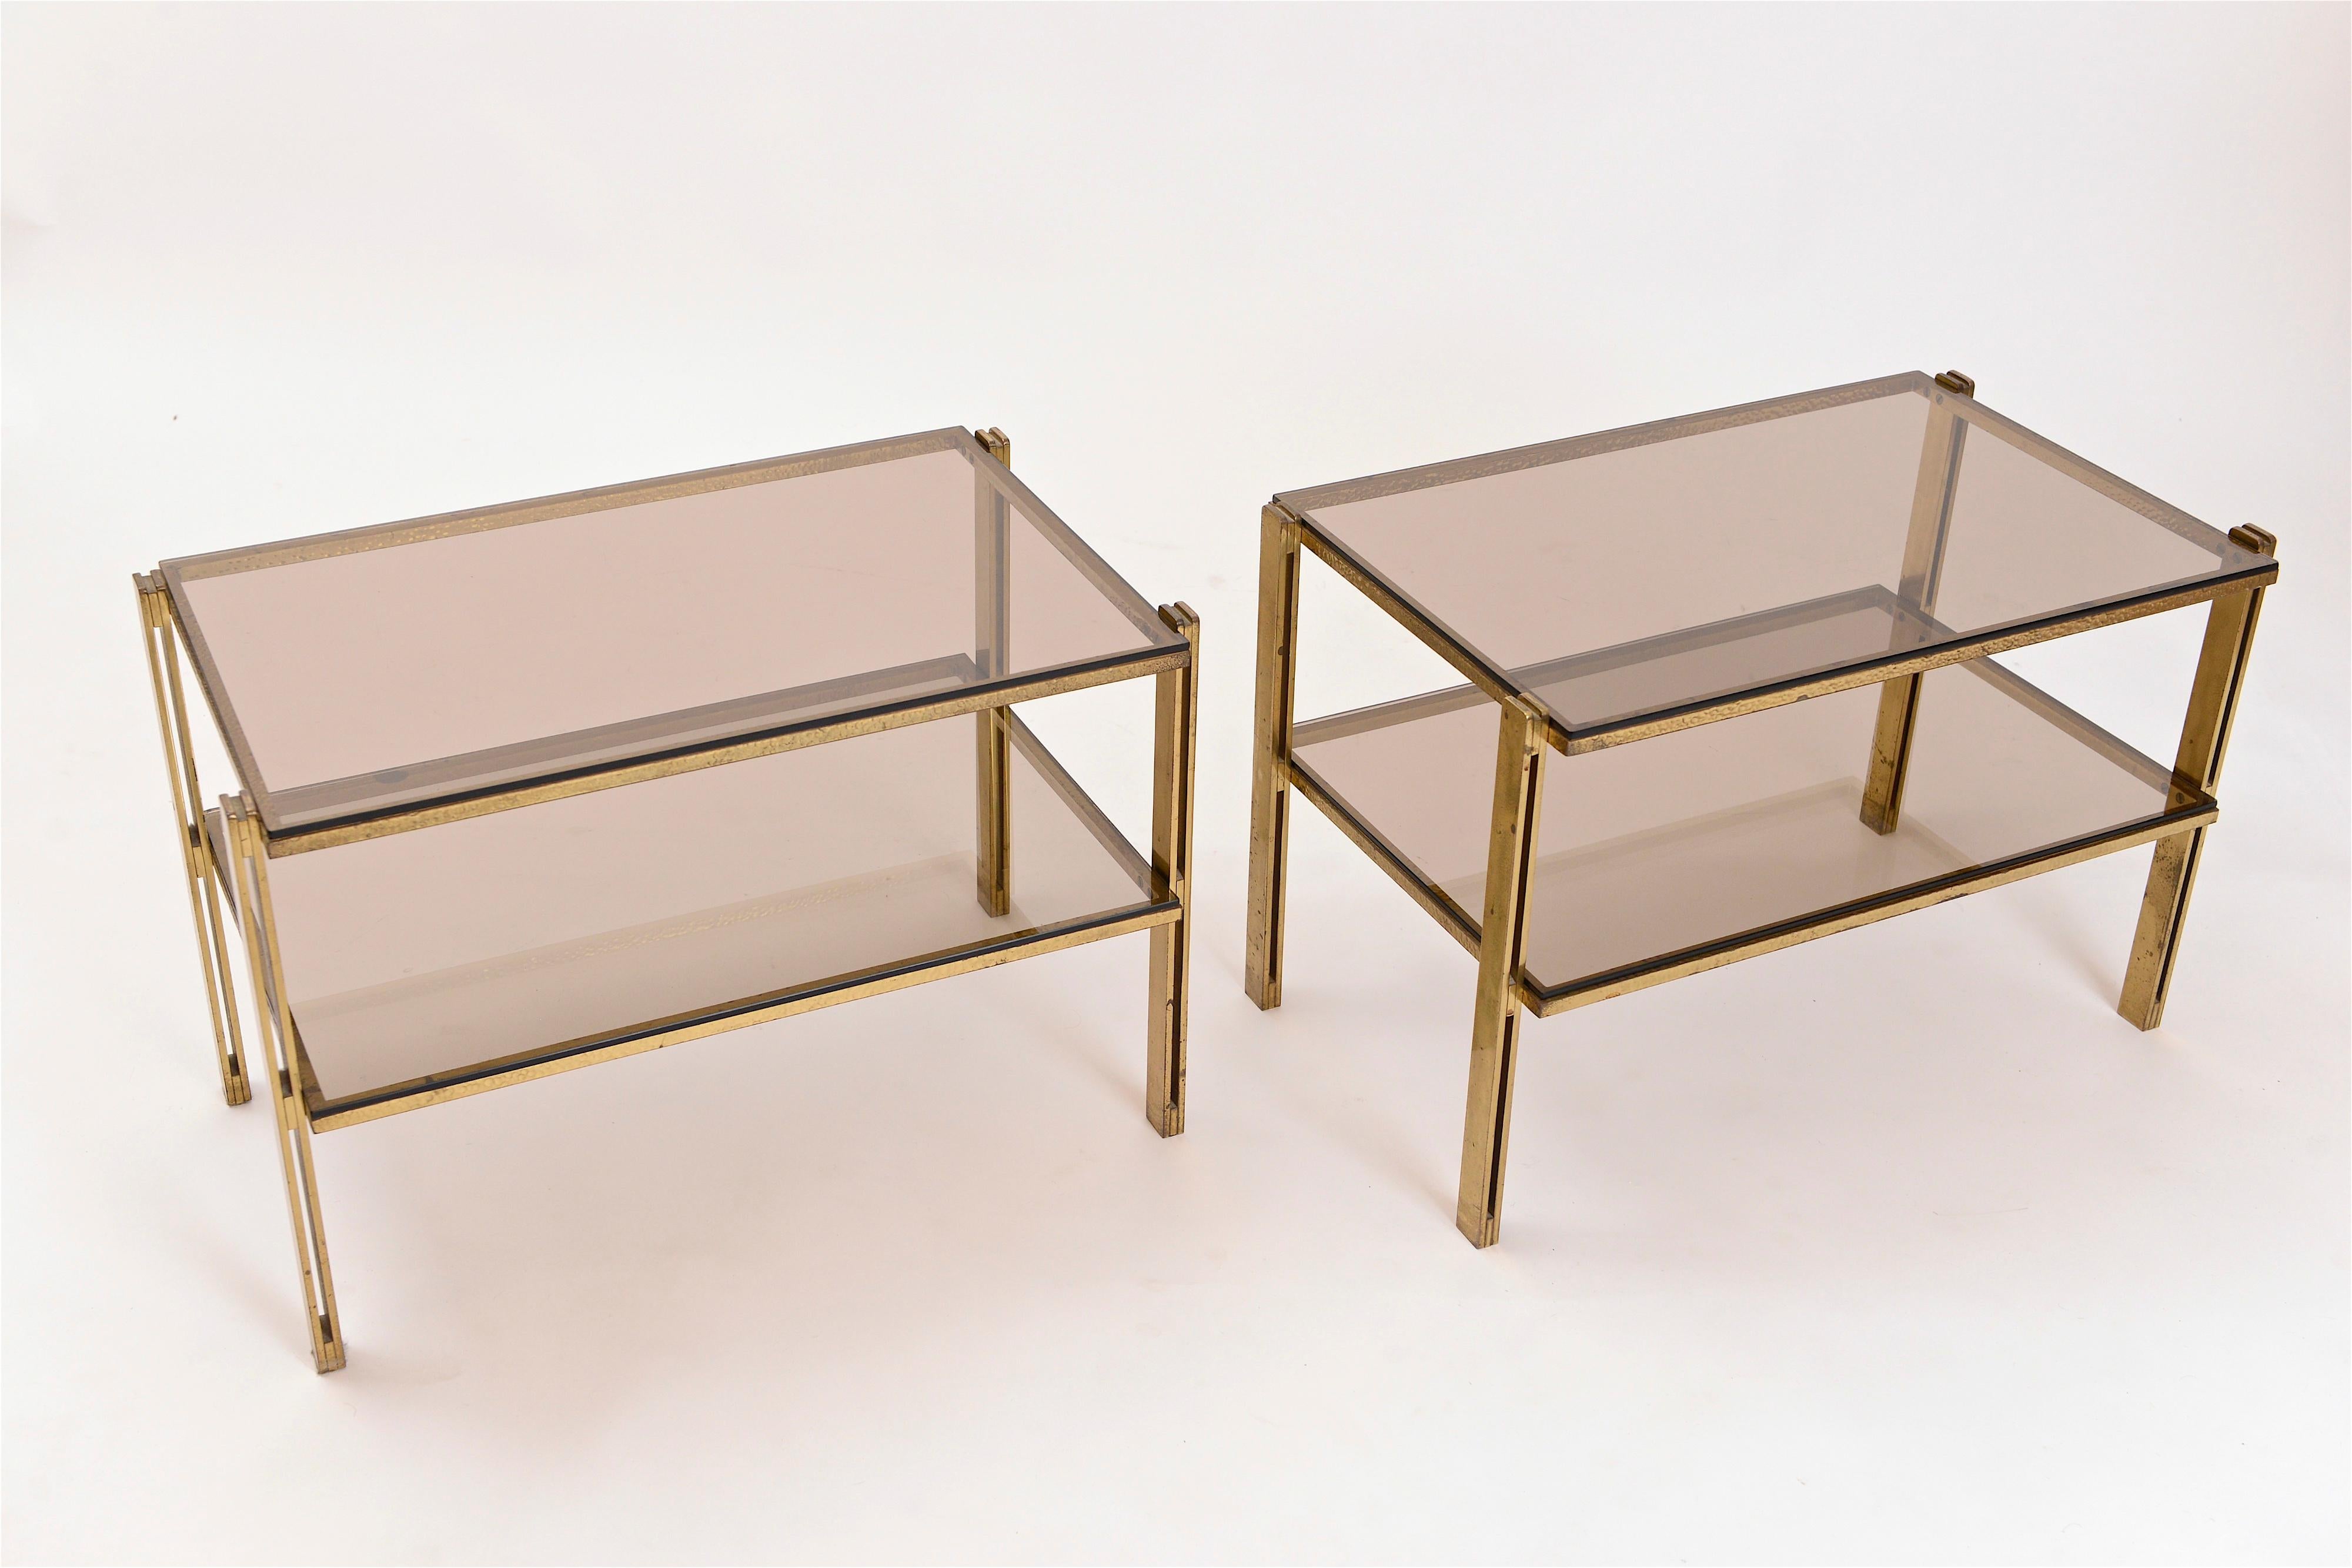 20th Century Pair of Hammered Brass Side Tables Attributed to Osvaldo Borsani, circa 1958 For Sale